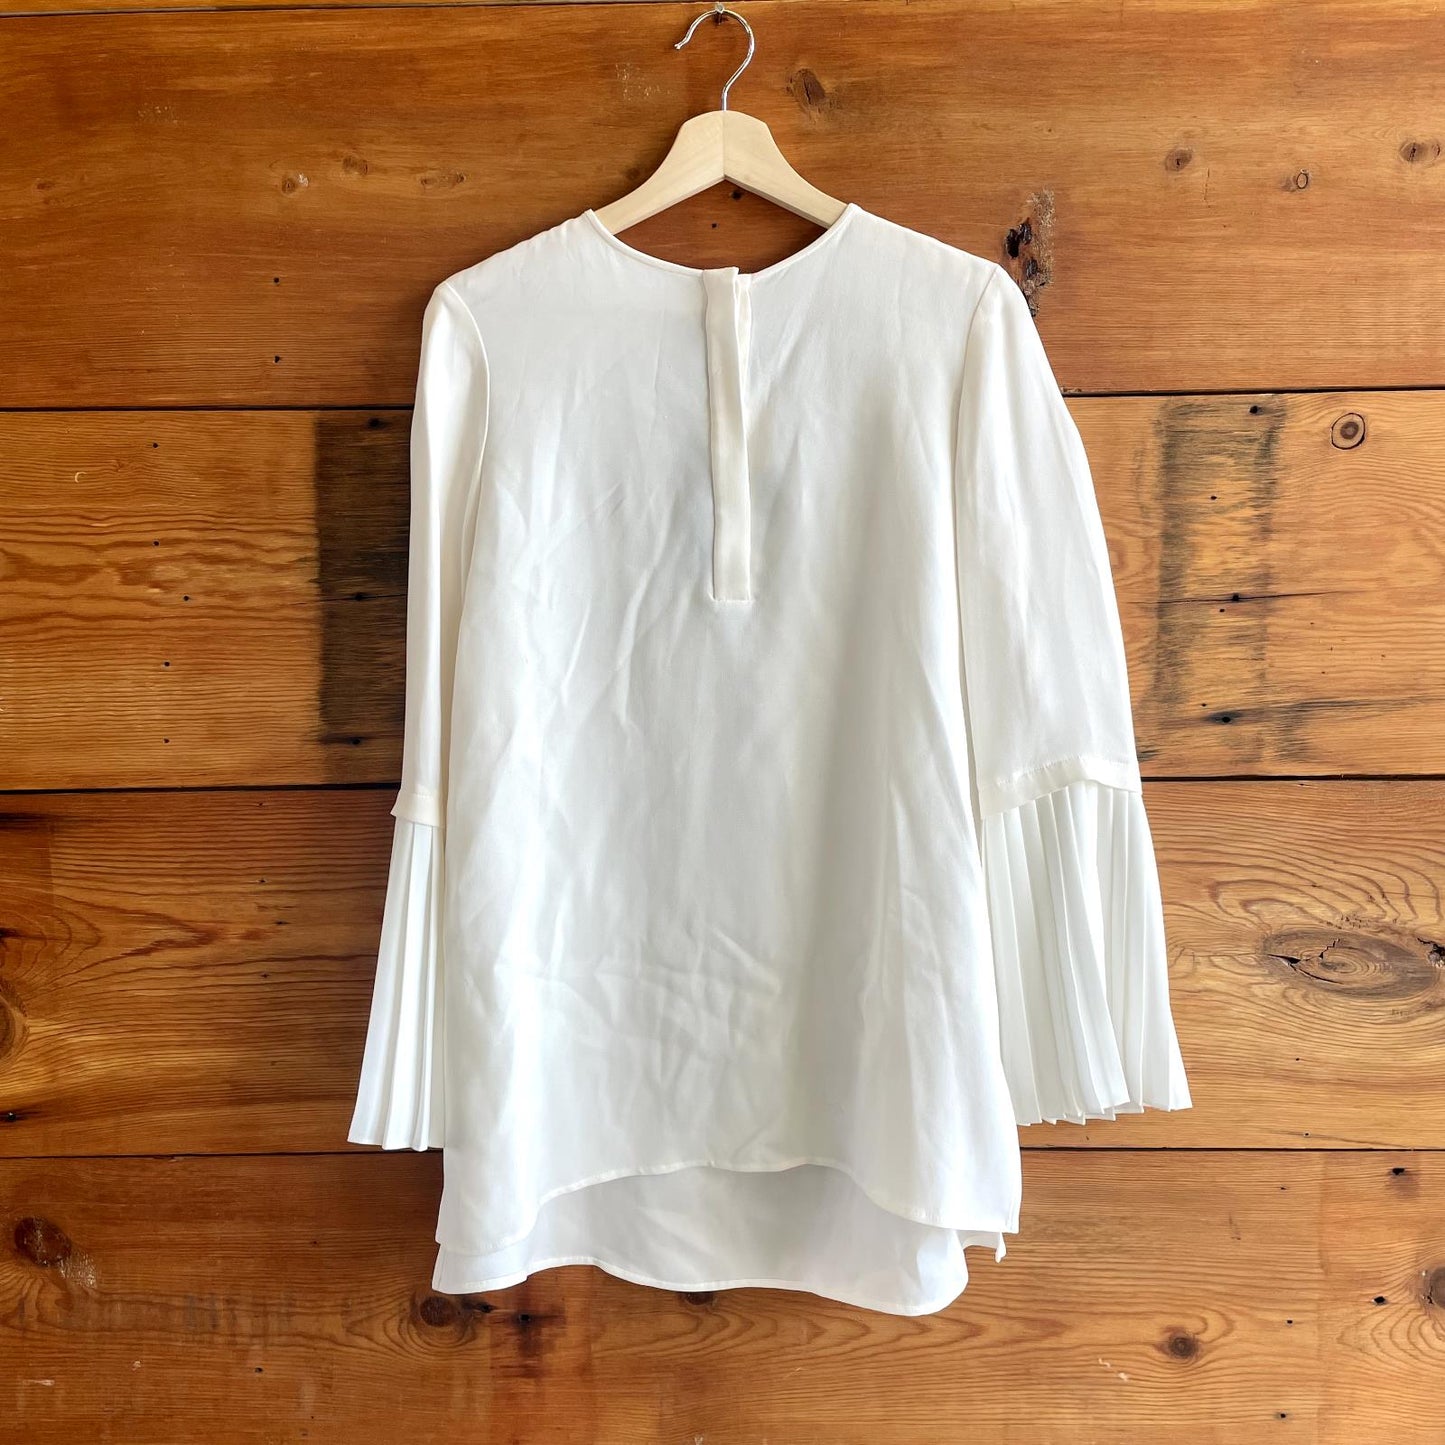 S - Lafayette 148 Cloud White $448 Pleated Sleeve Shellie Blouse Top NEW 1217BT